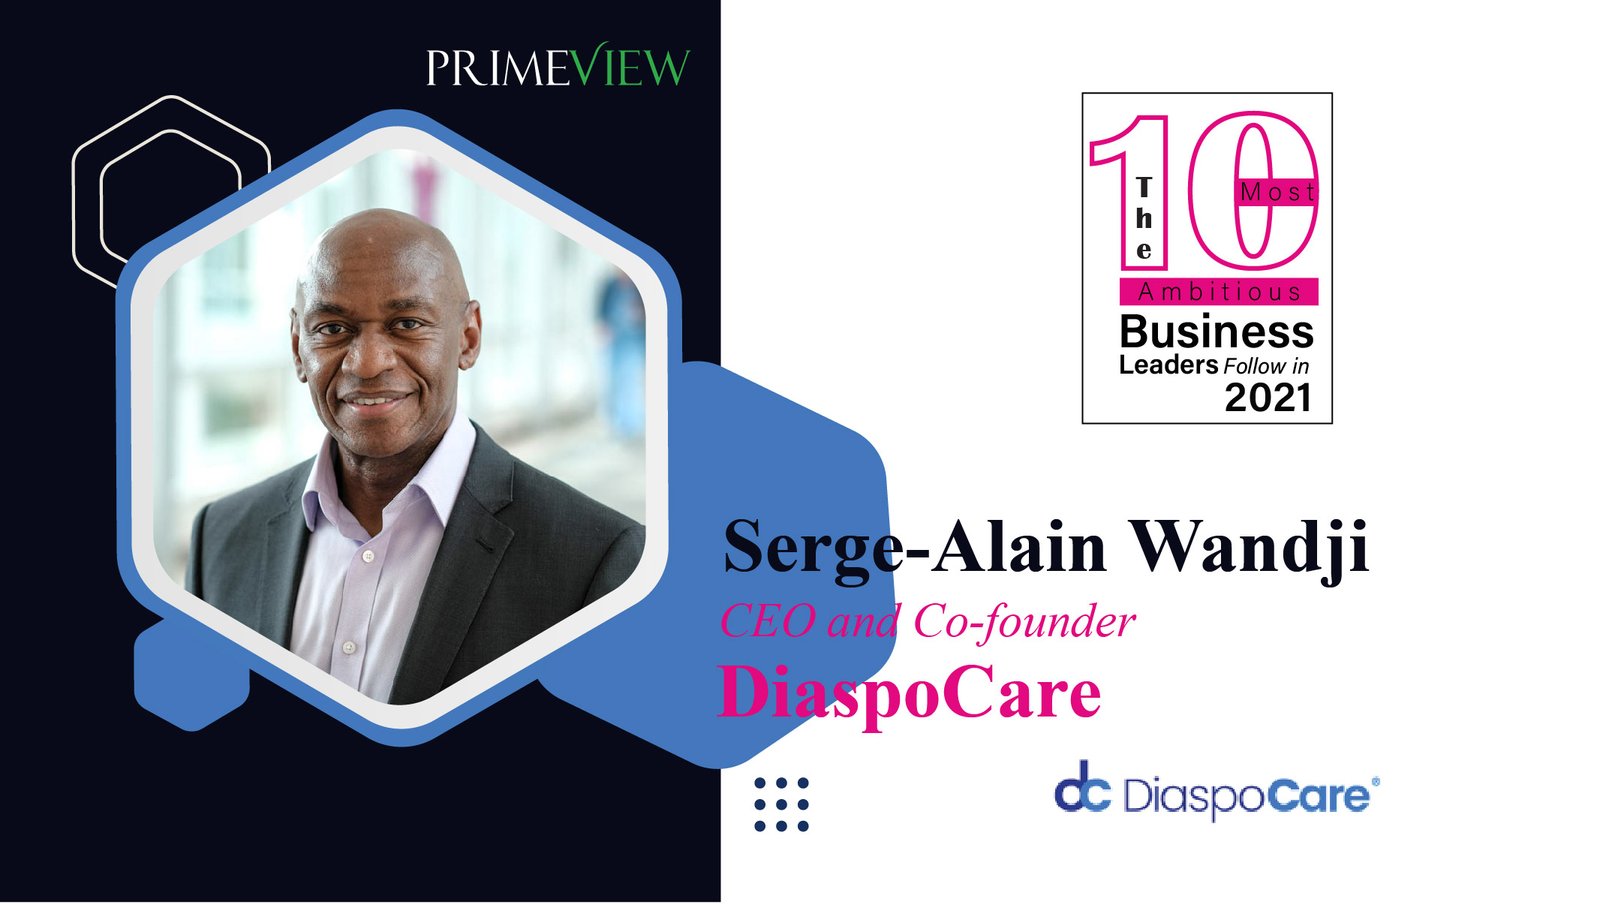 CEO and Co-founder | DiaspoCare | Serge-Alain Wandji: Adding Values in Lives by Improving Healthcare System in Developing Countries